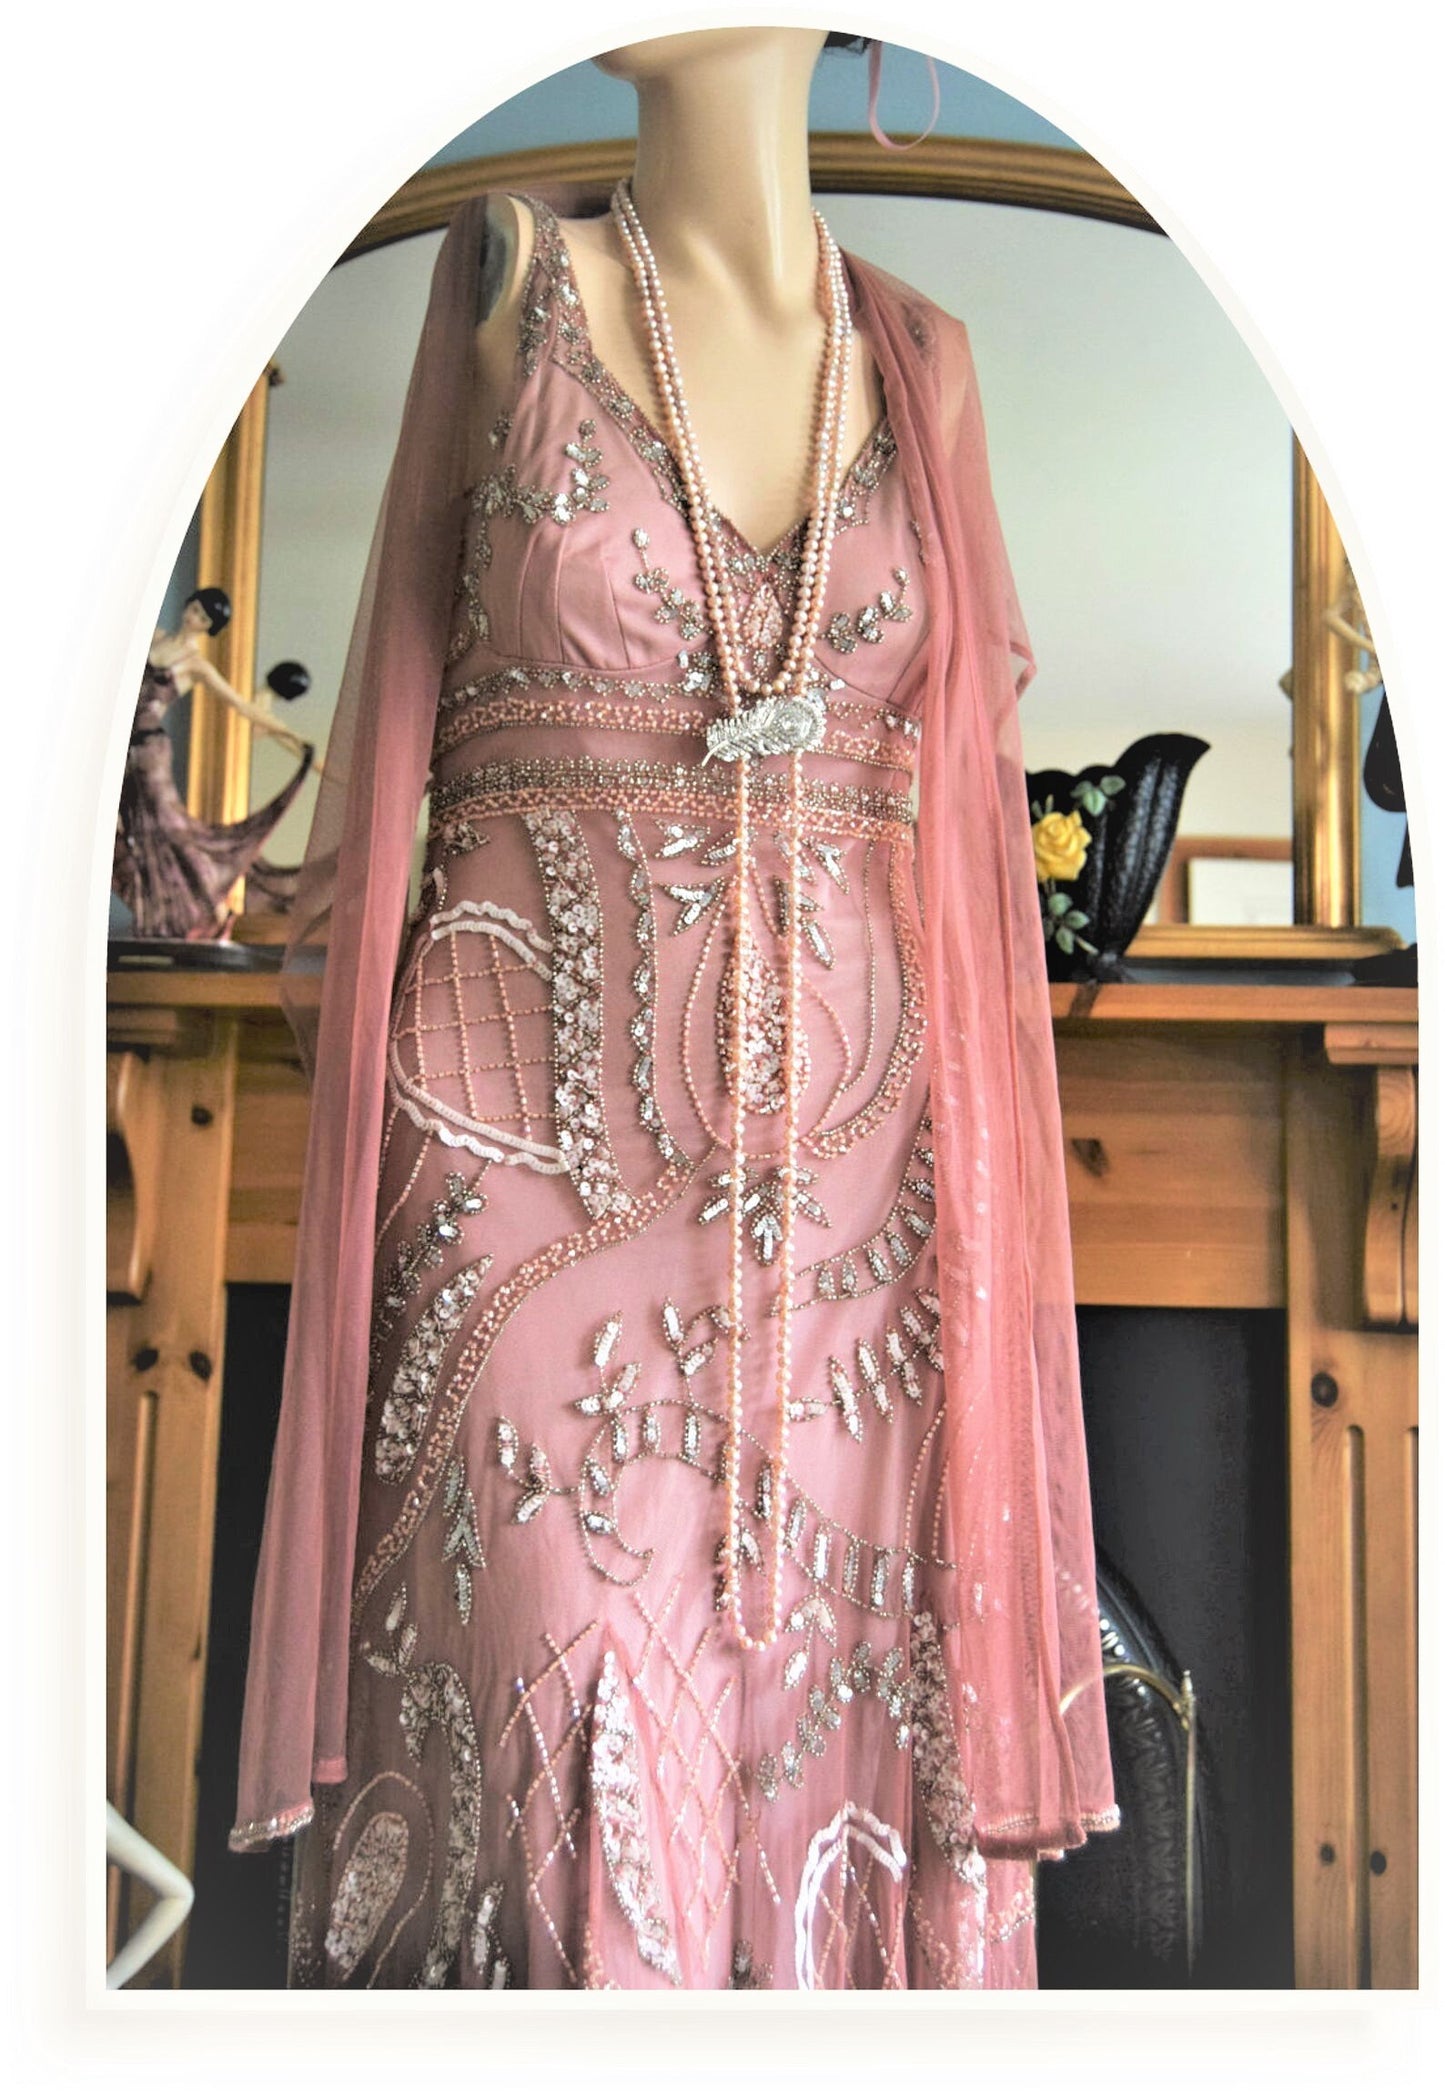 Art Deco style Downton Abbey vintage 1920s dress flapper style embellished beaded dusty pink floral dress evening gown size UK  14 US 10